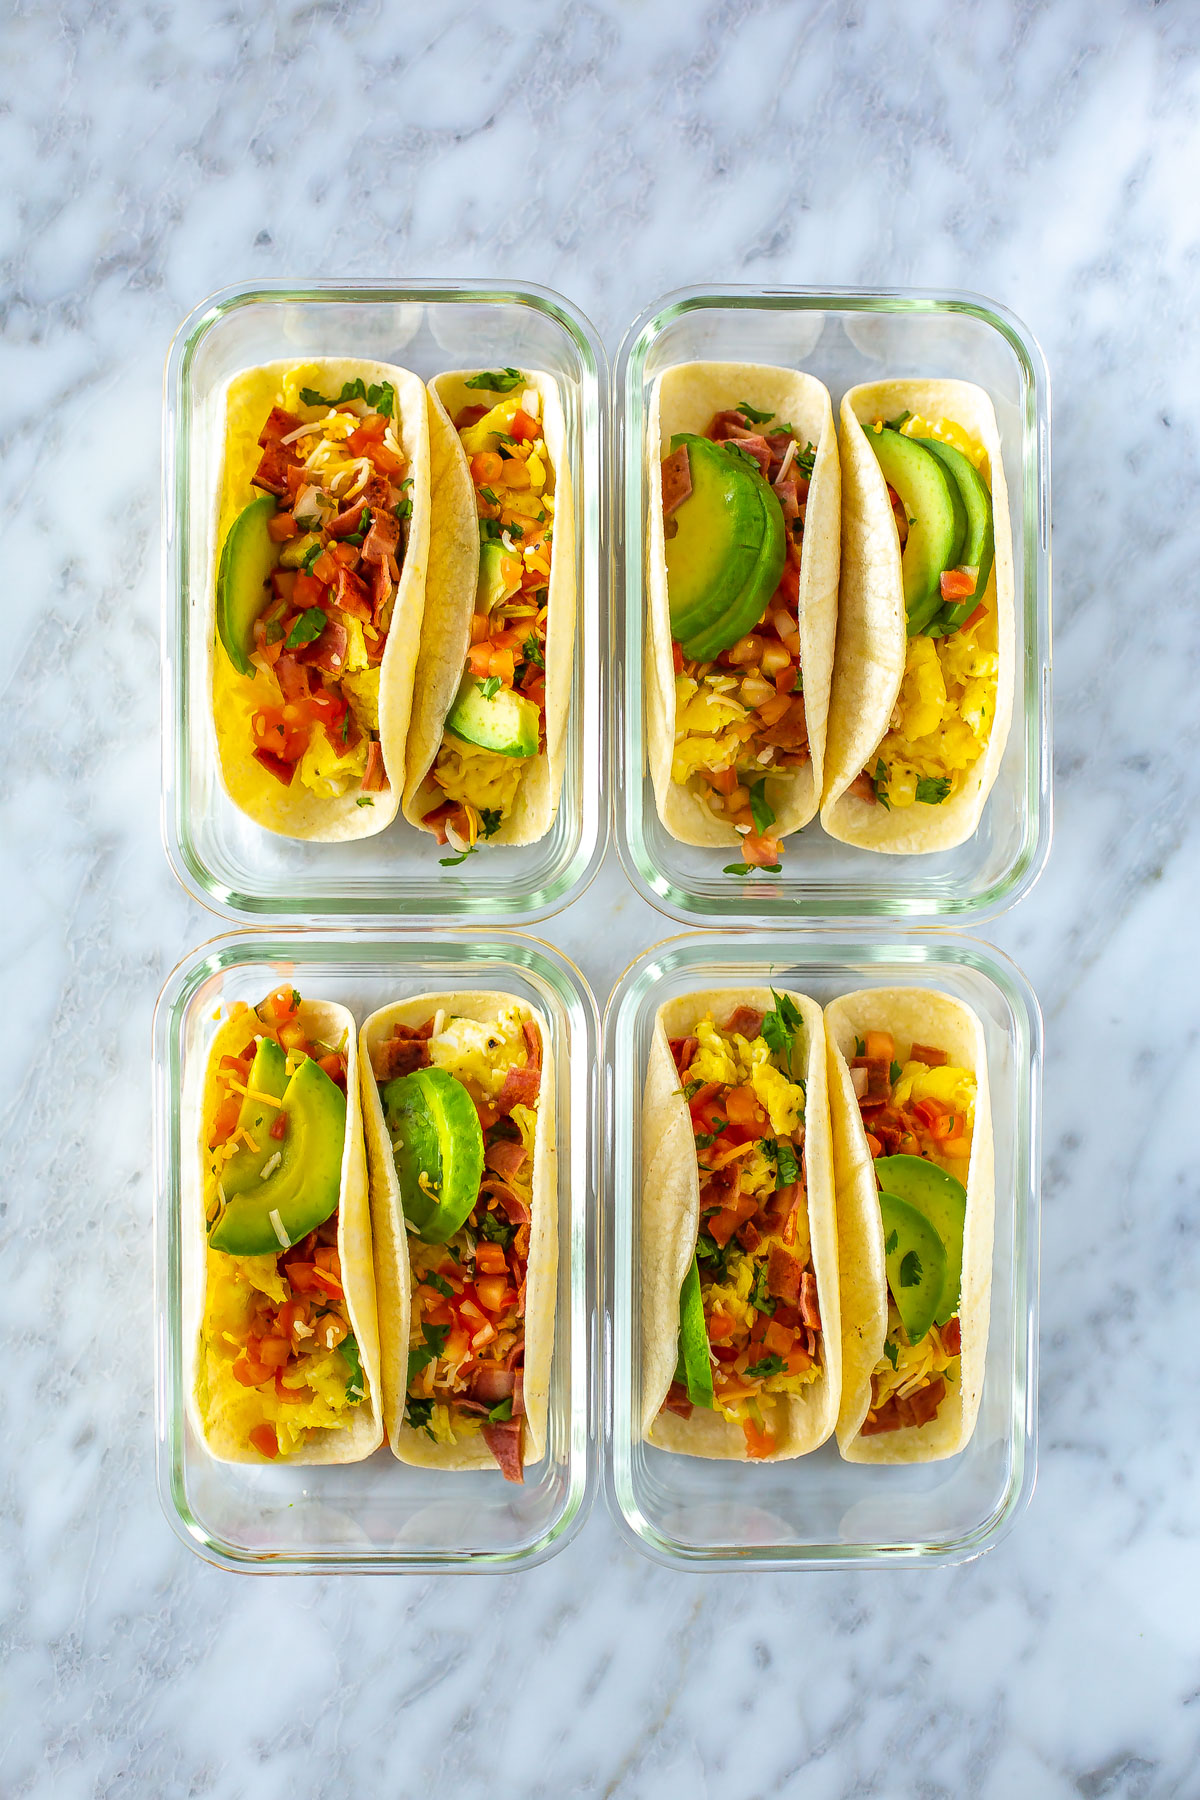 Four meal prep containers, each with two breakfast tacos inside.